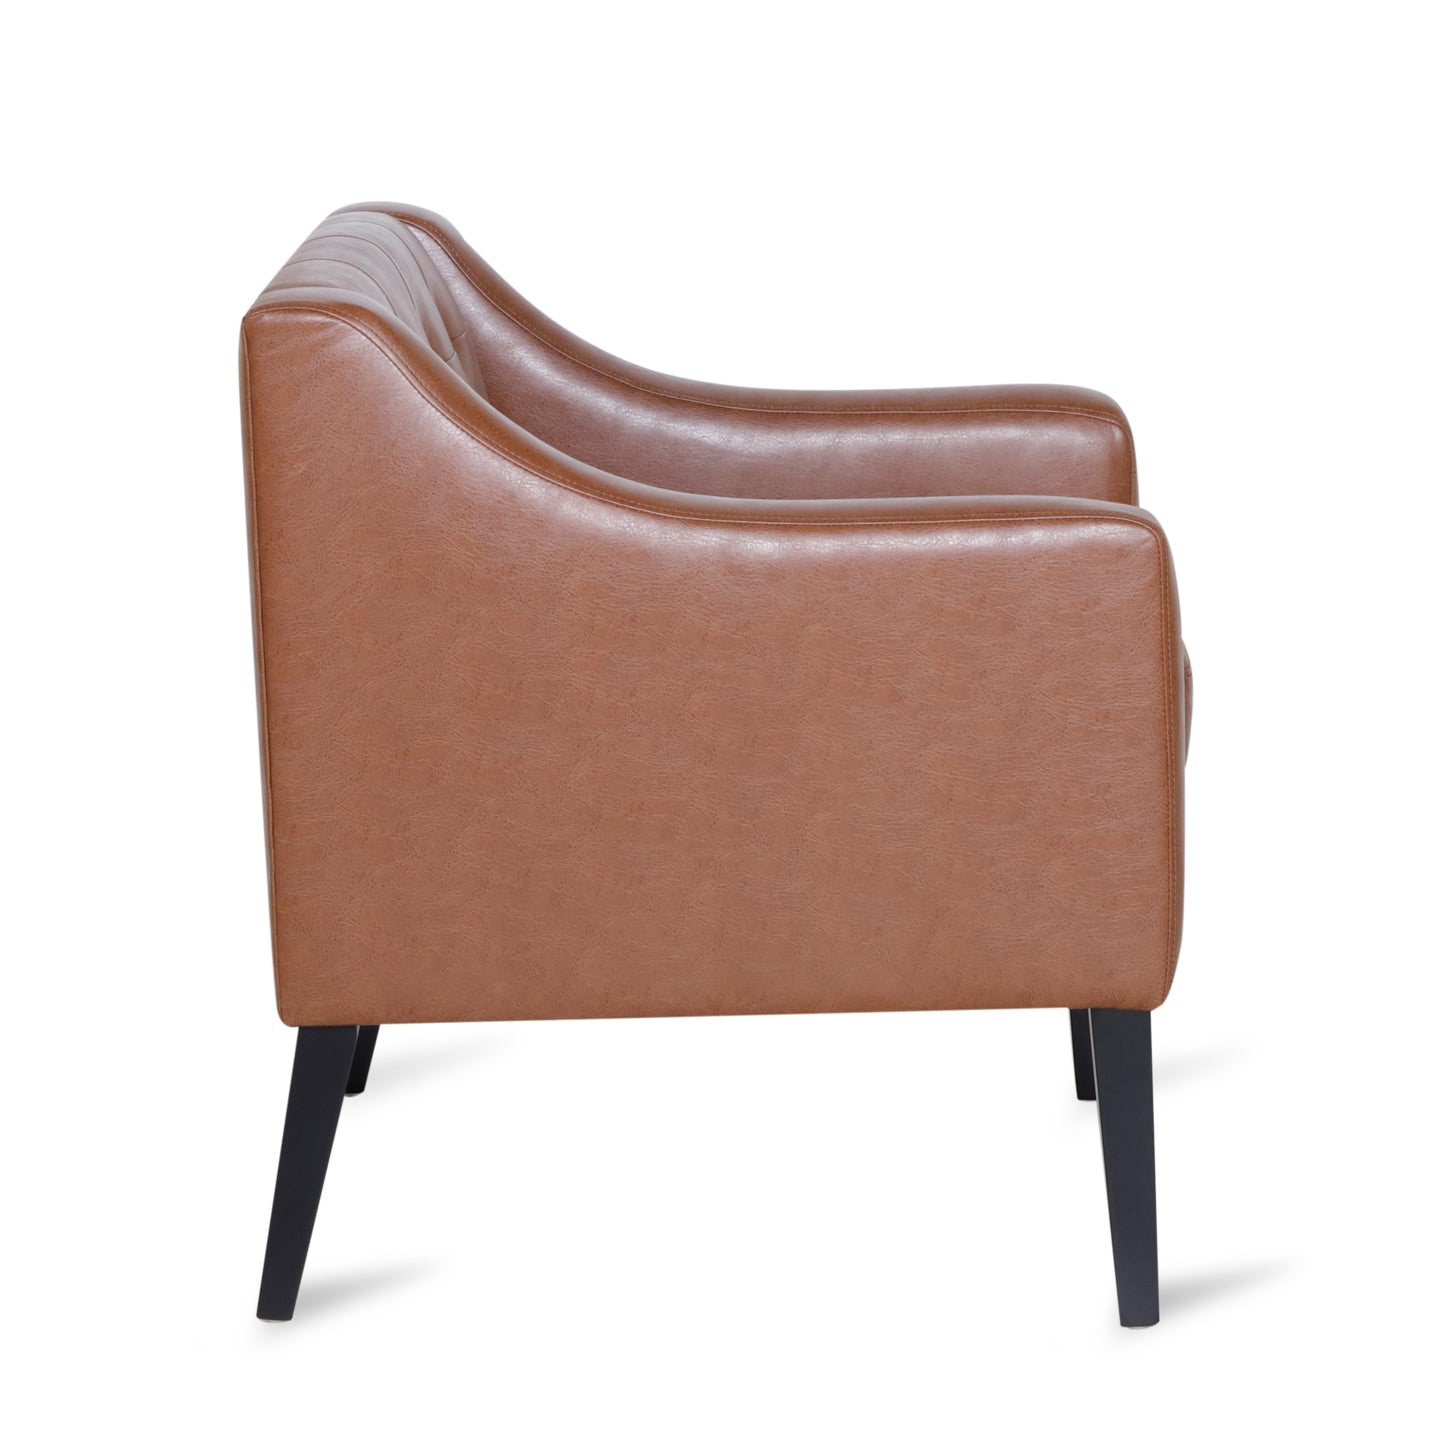 Aragon Contemporary Faux Leather Tufted Accent Chair